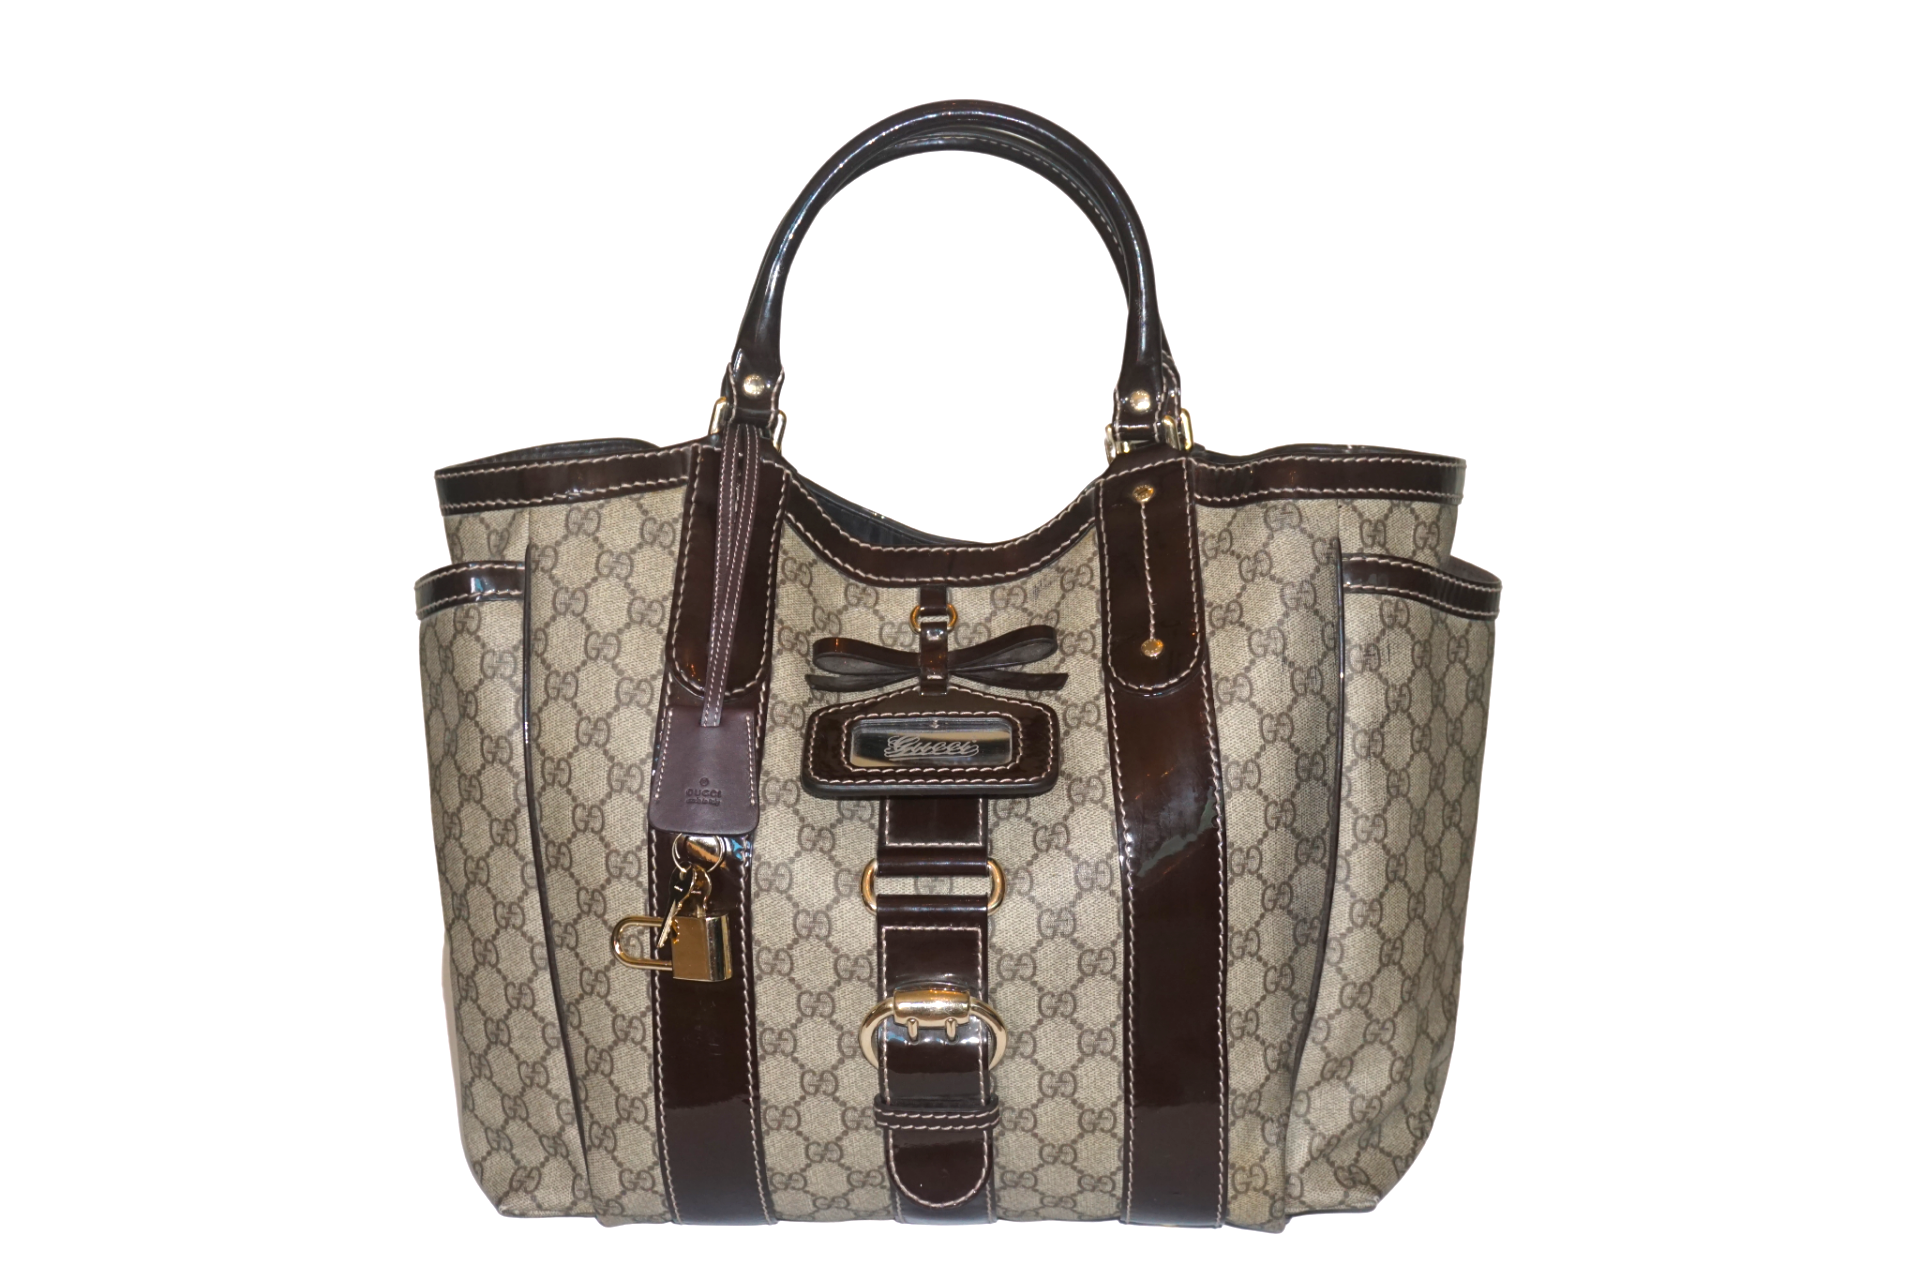 Gucci Brown and Dark Tan GG Canvas and Leather Large Sukey Tote